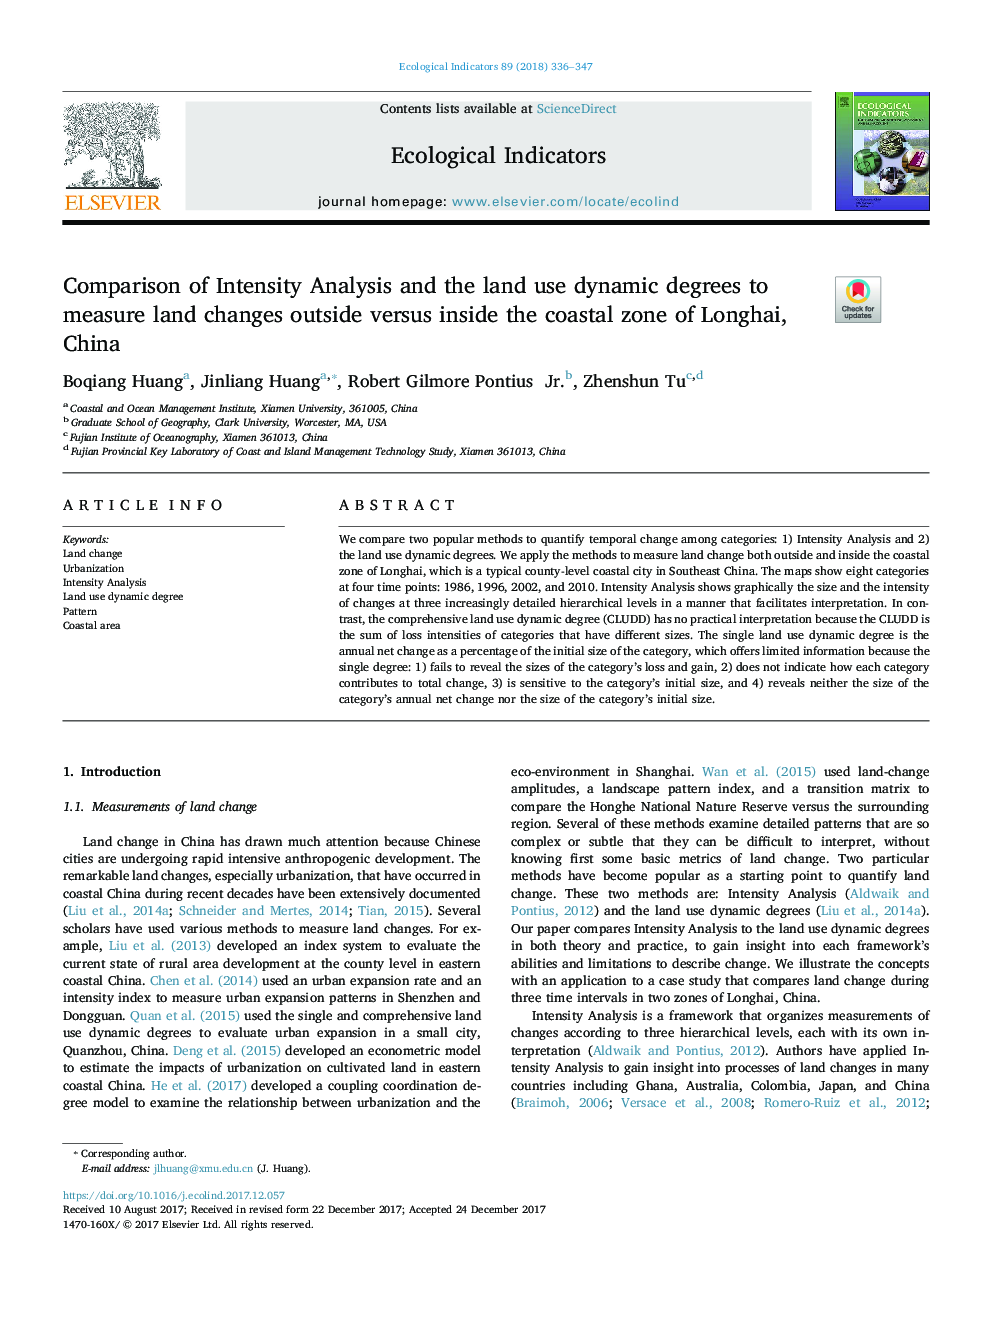 Comparison of Intensity Analysis and the land use dynamic degrees to measure land changes outside versus inside the coastal zone of Longhai, China